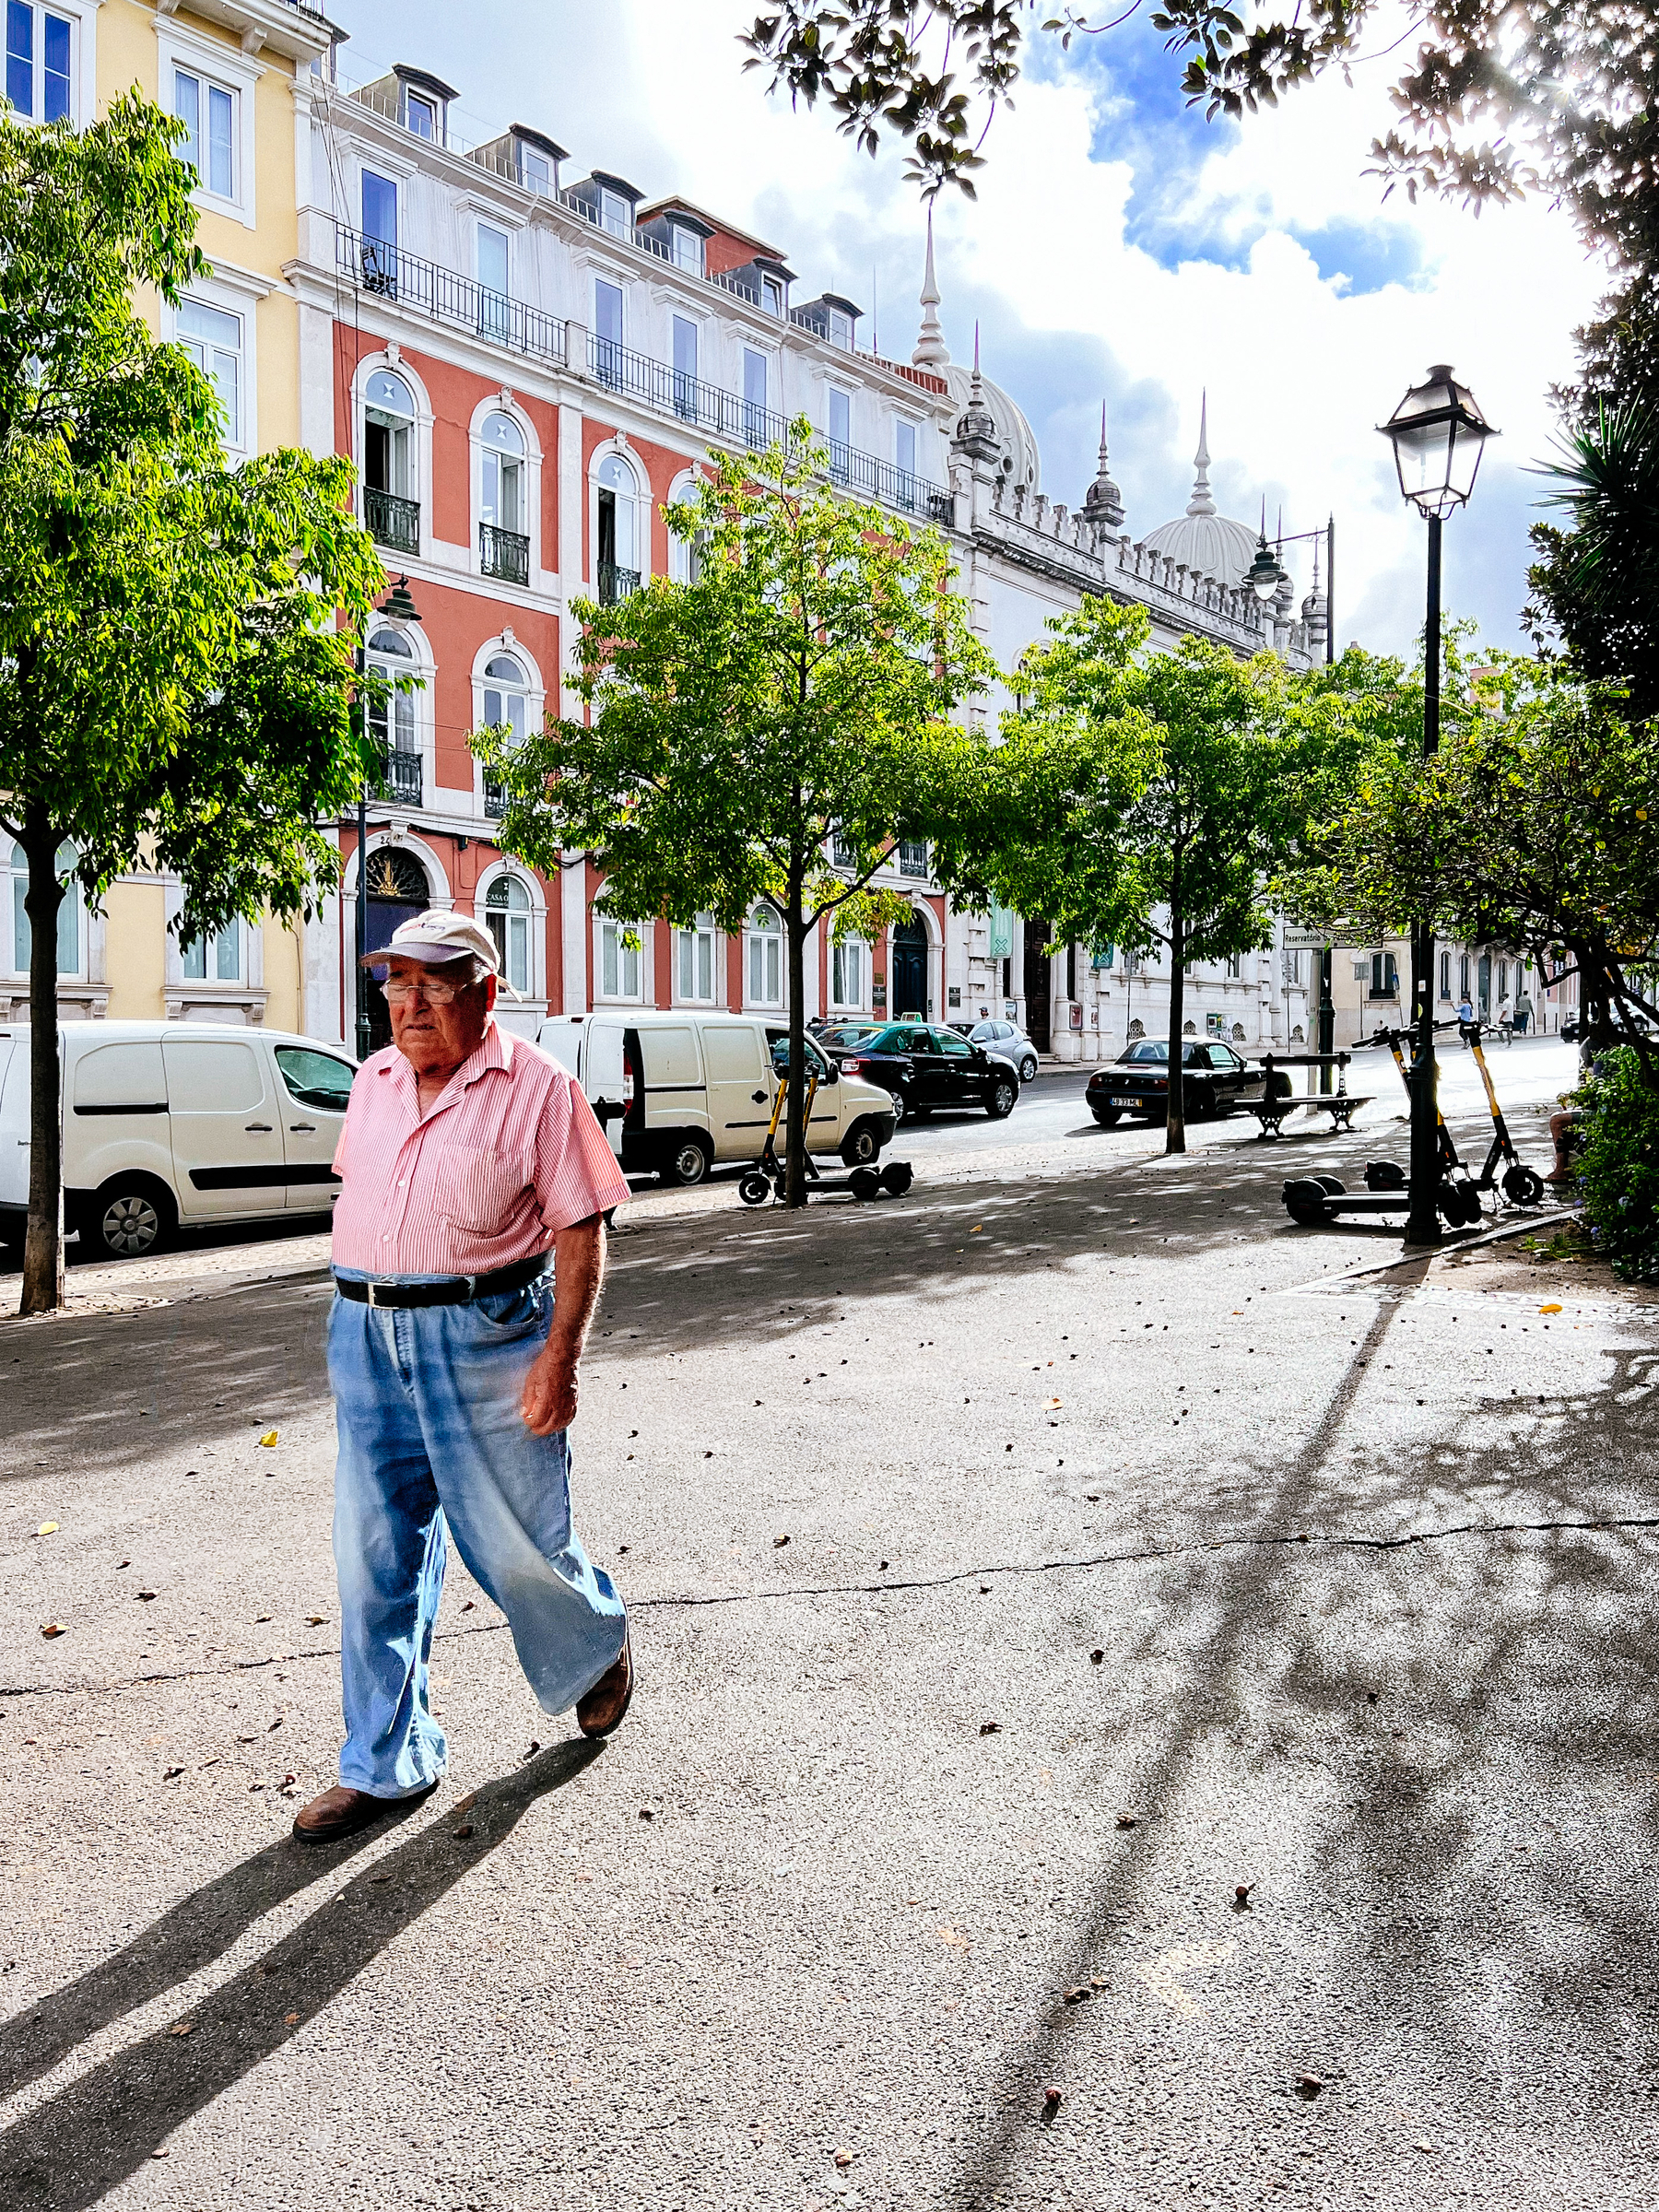 a man walks on the street, colorful buildings behind him